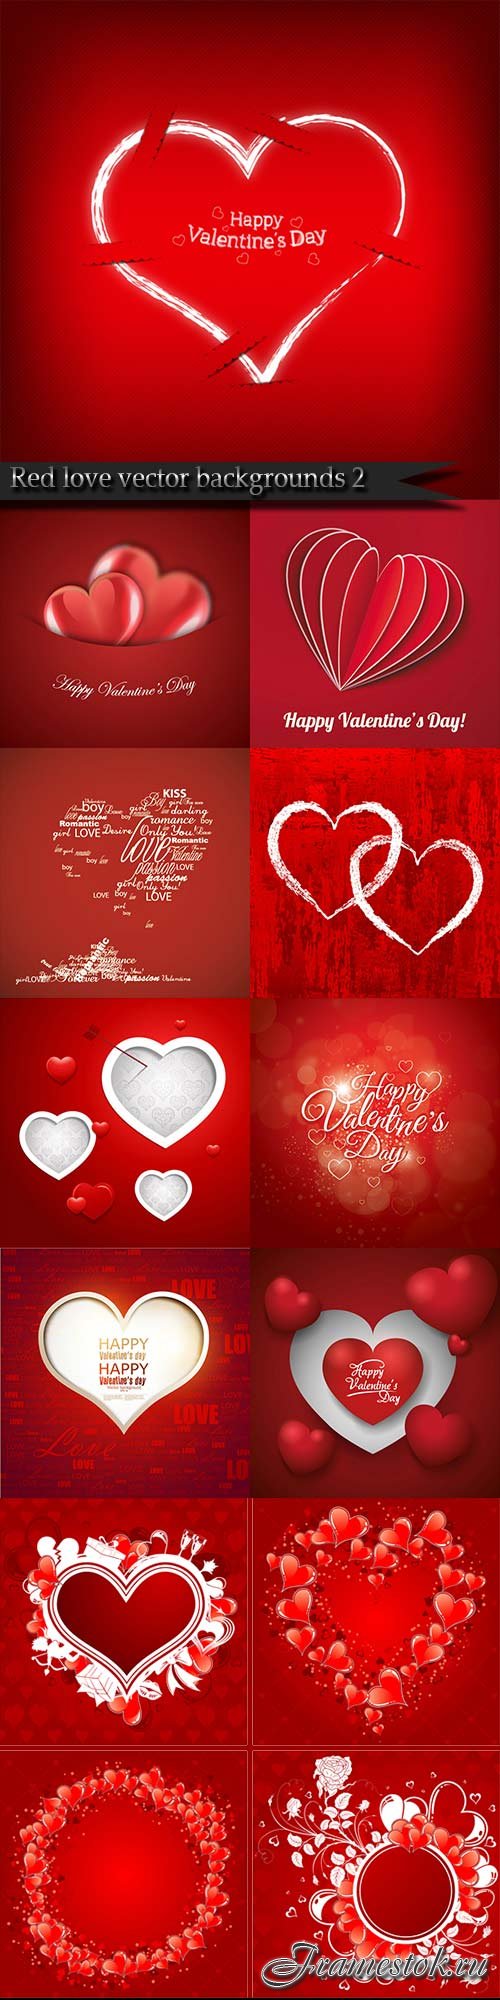 Red love vector backgrounds 2